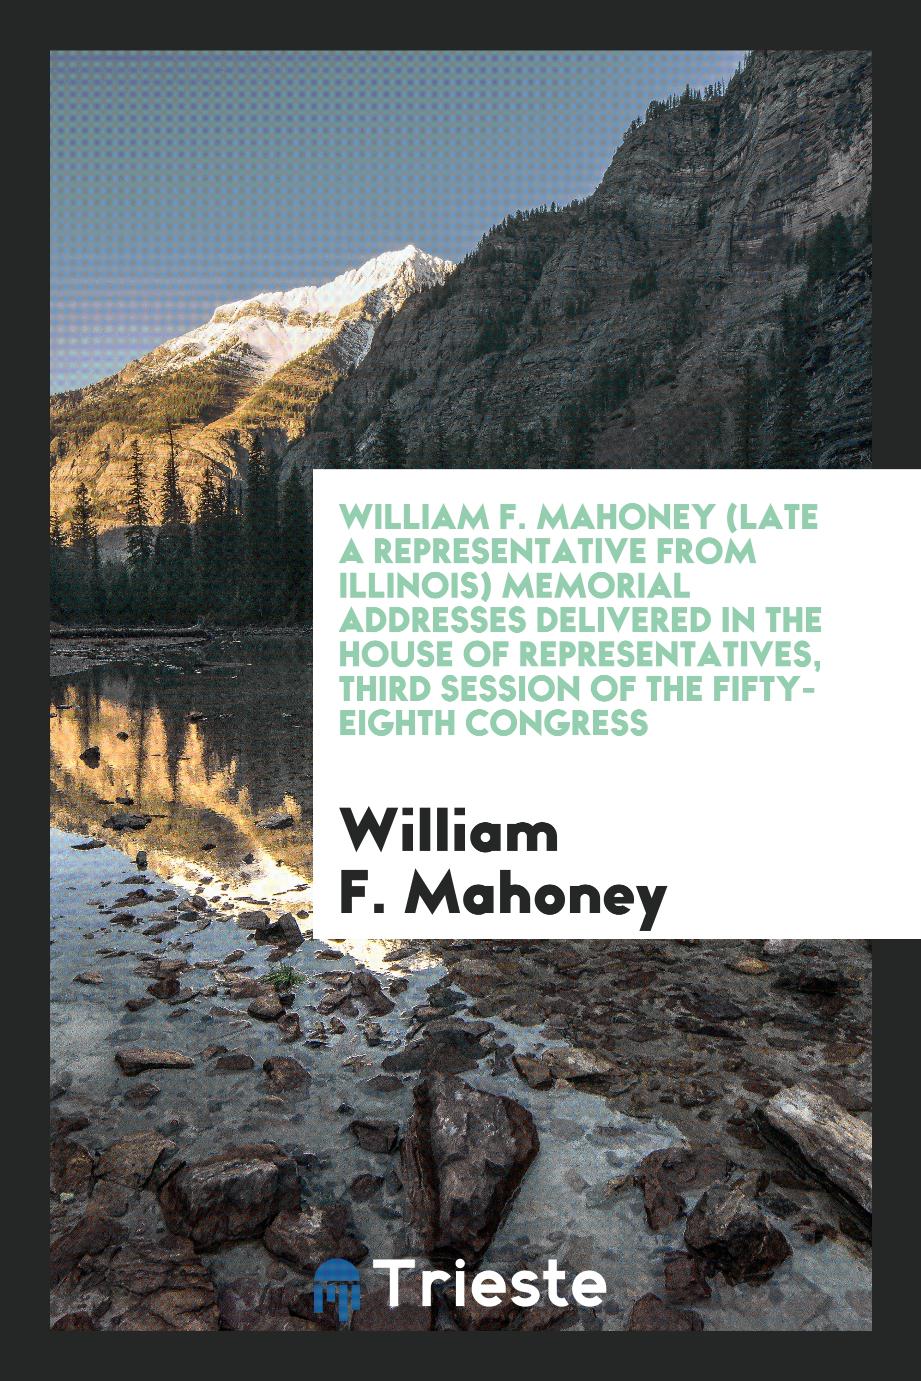 William F. Mahoney (late a representative from Illinois) Memorial addresses delivered in the House of Representatives, third session of the Fifty-eighth Congress